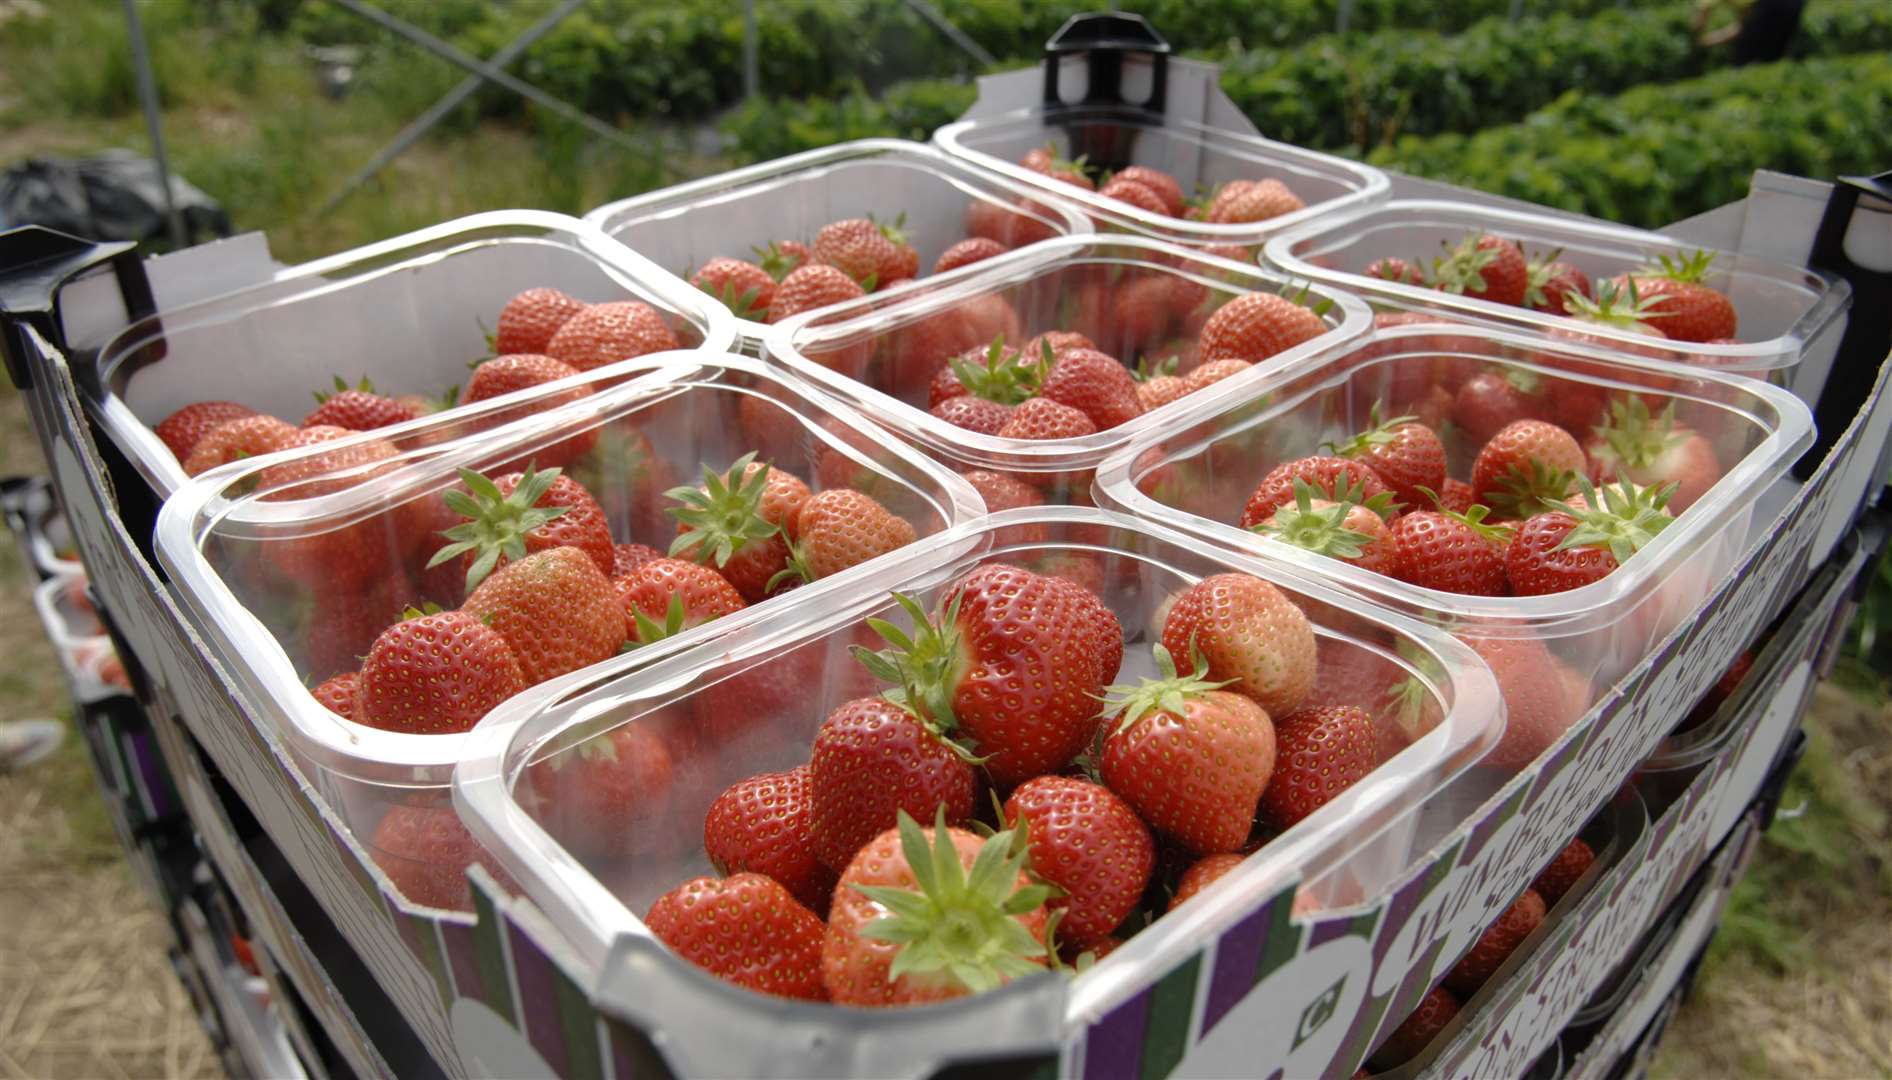 Strawberries from Hugh Lowe Farms in Mereworth are sent to Wimbledon. Picture: Matthew Reading